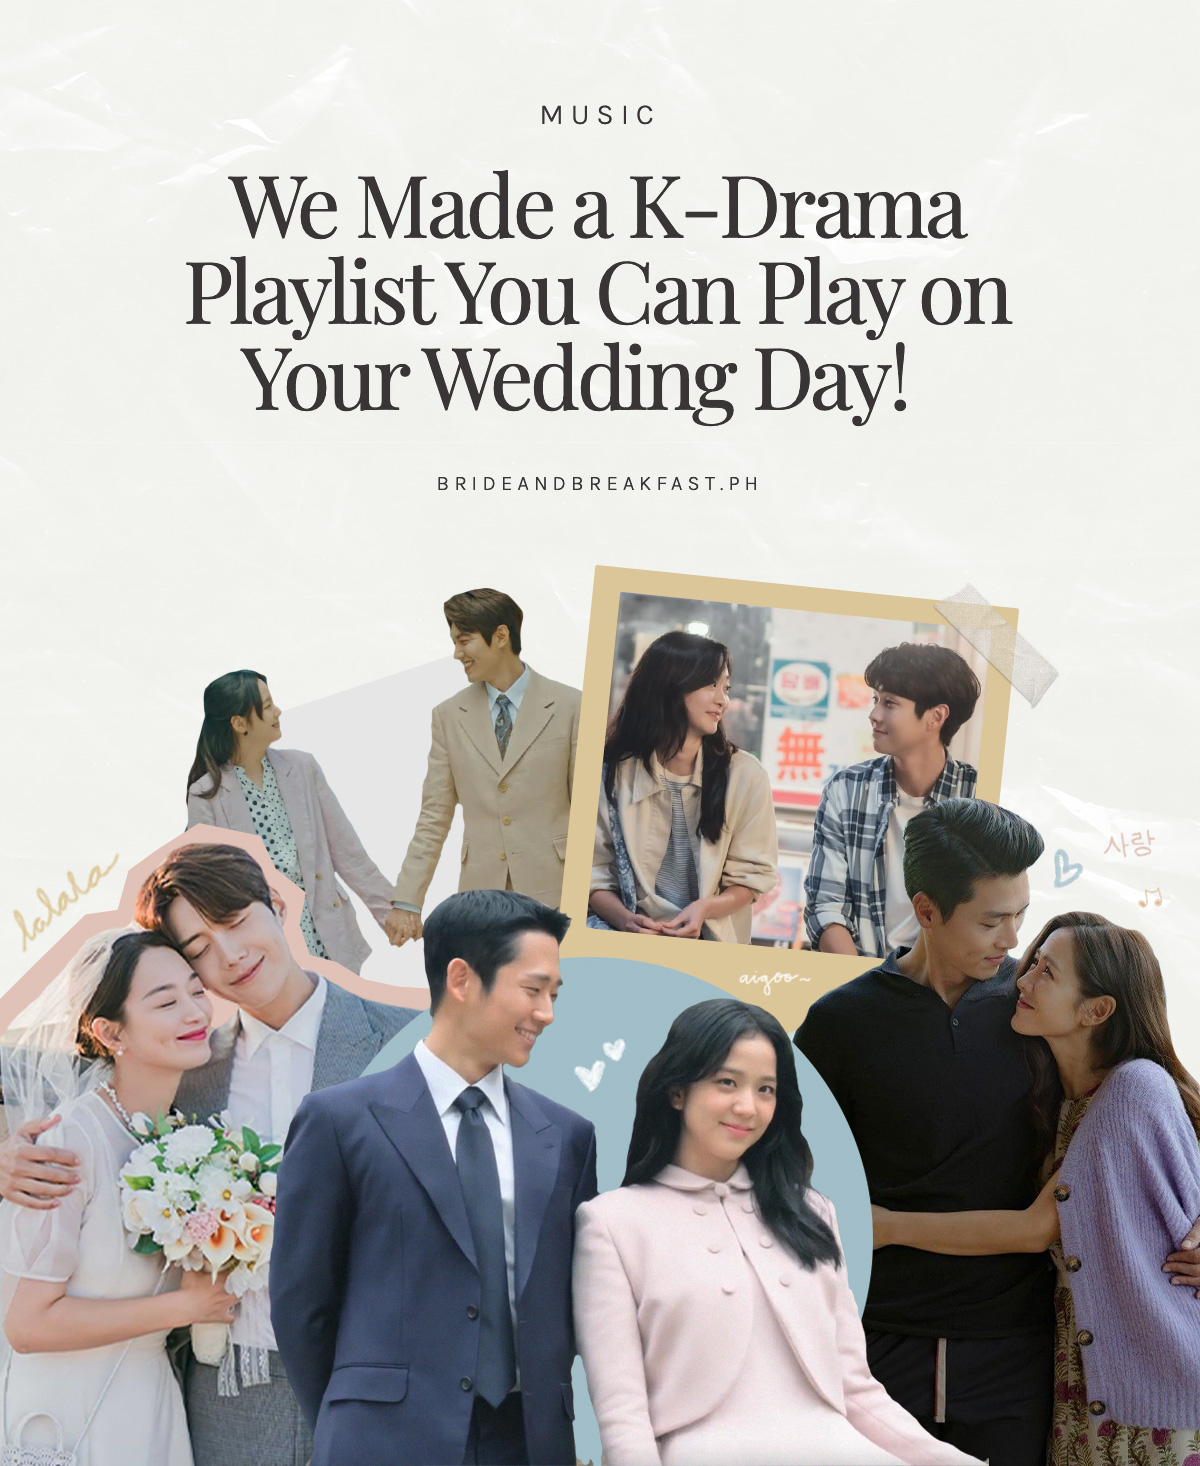 We Made a K-Drama Playlist You Can Play on Your Wedding Day!